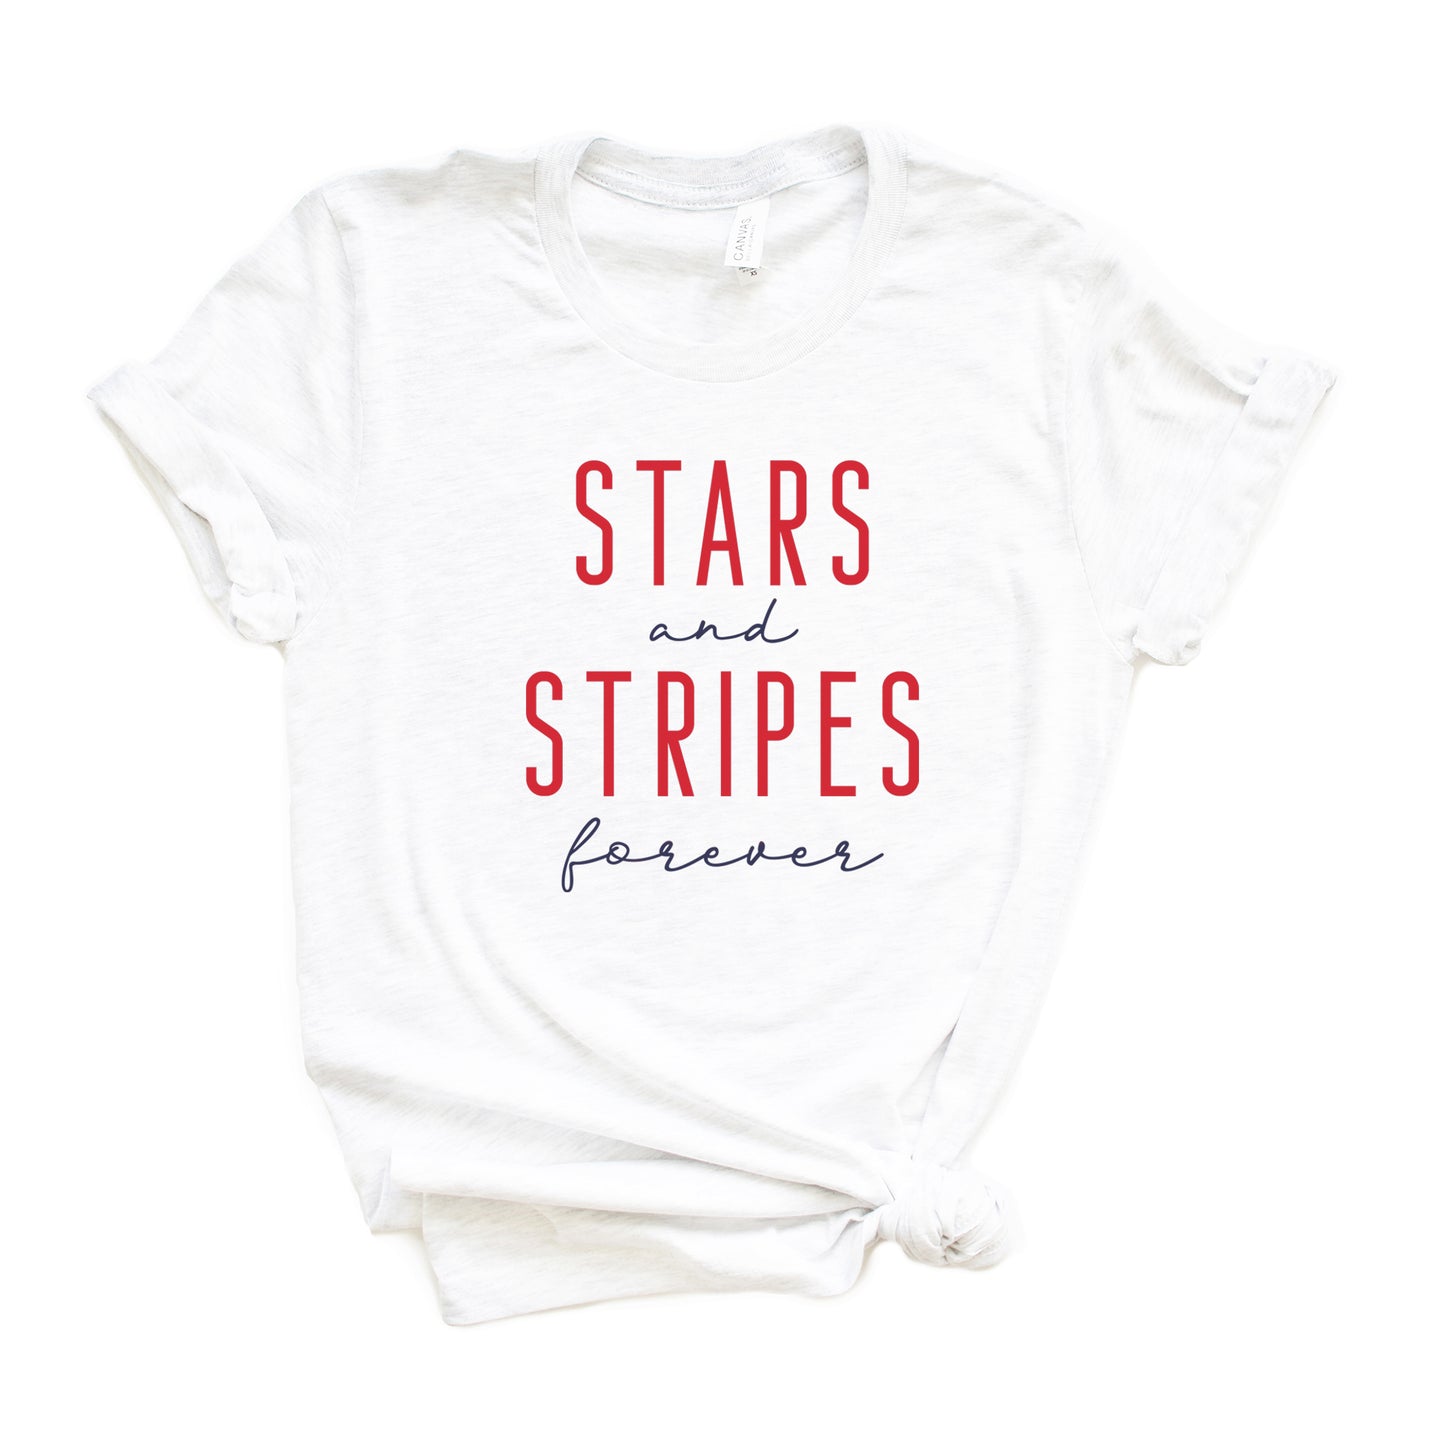 Stars and Stripes Forever | Short Sleeve Graphic Tee